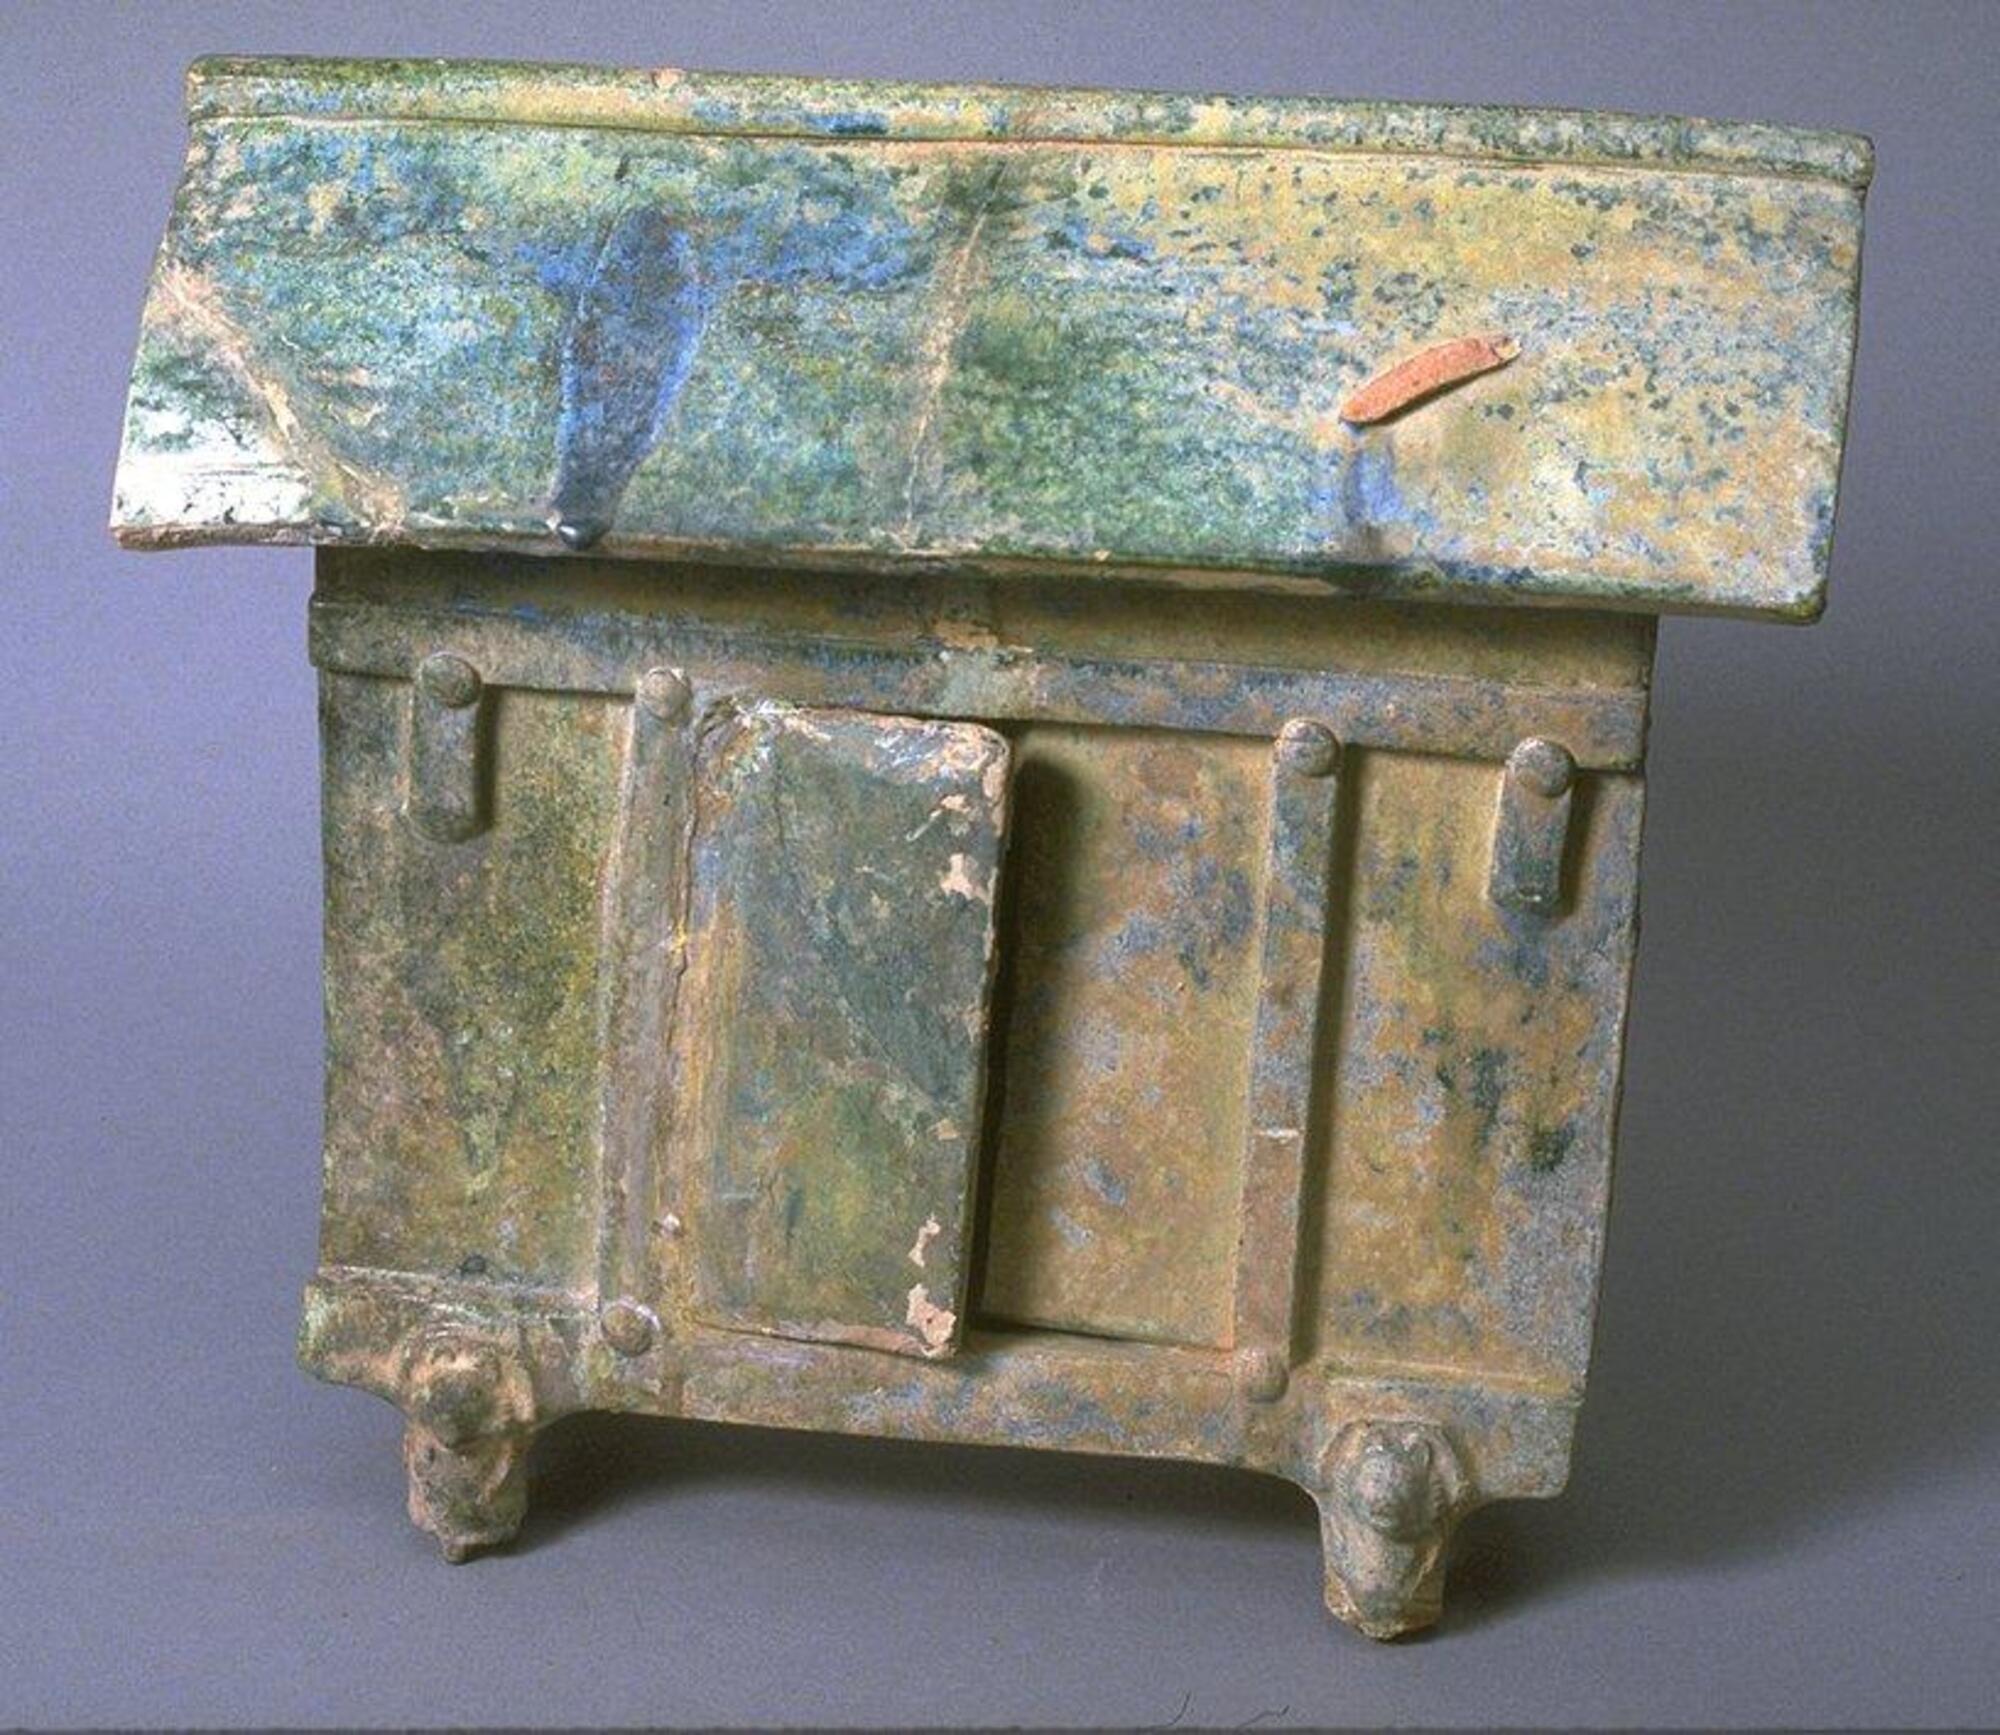 A red, four-sided rectangular earthenware structure in the form of a three-bay storehouse with a peaked roof and ridgeline. Post and lintel details from wooden architecture, with double open doors, on four bear-shaped stilts. The model is covered with a green lead glaze, with iridescence and calcification. 